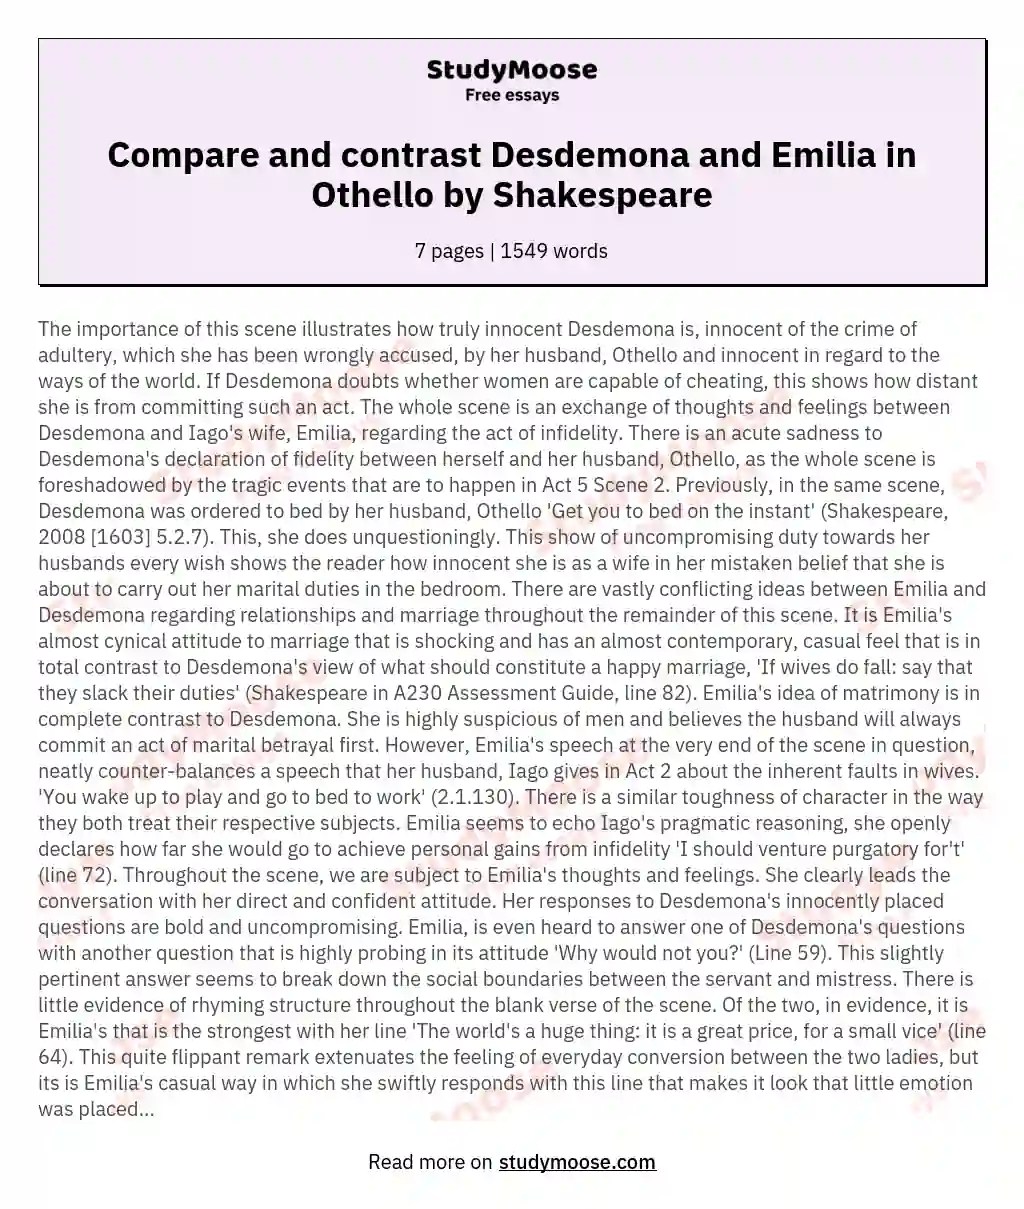 Compare and contrast Desdemona and Emilia in Othello by Shakespeare essay